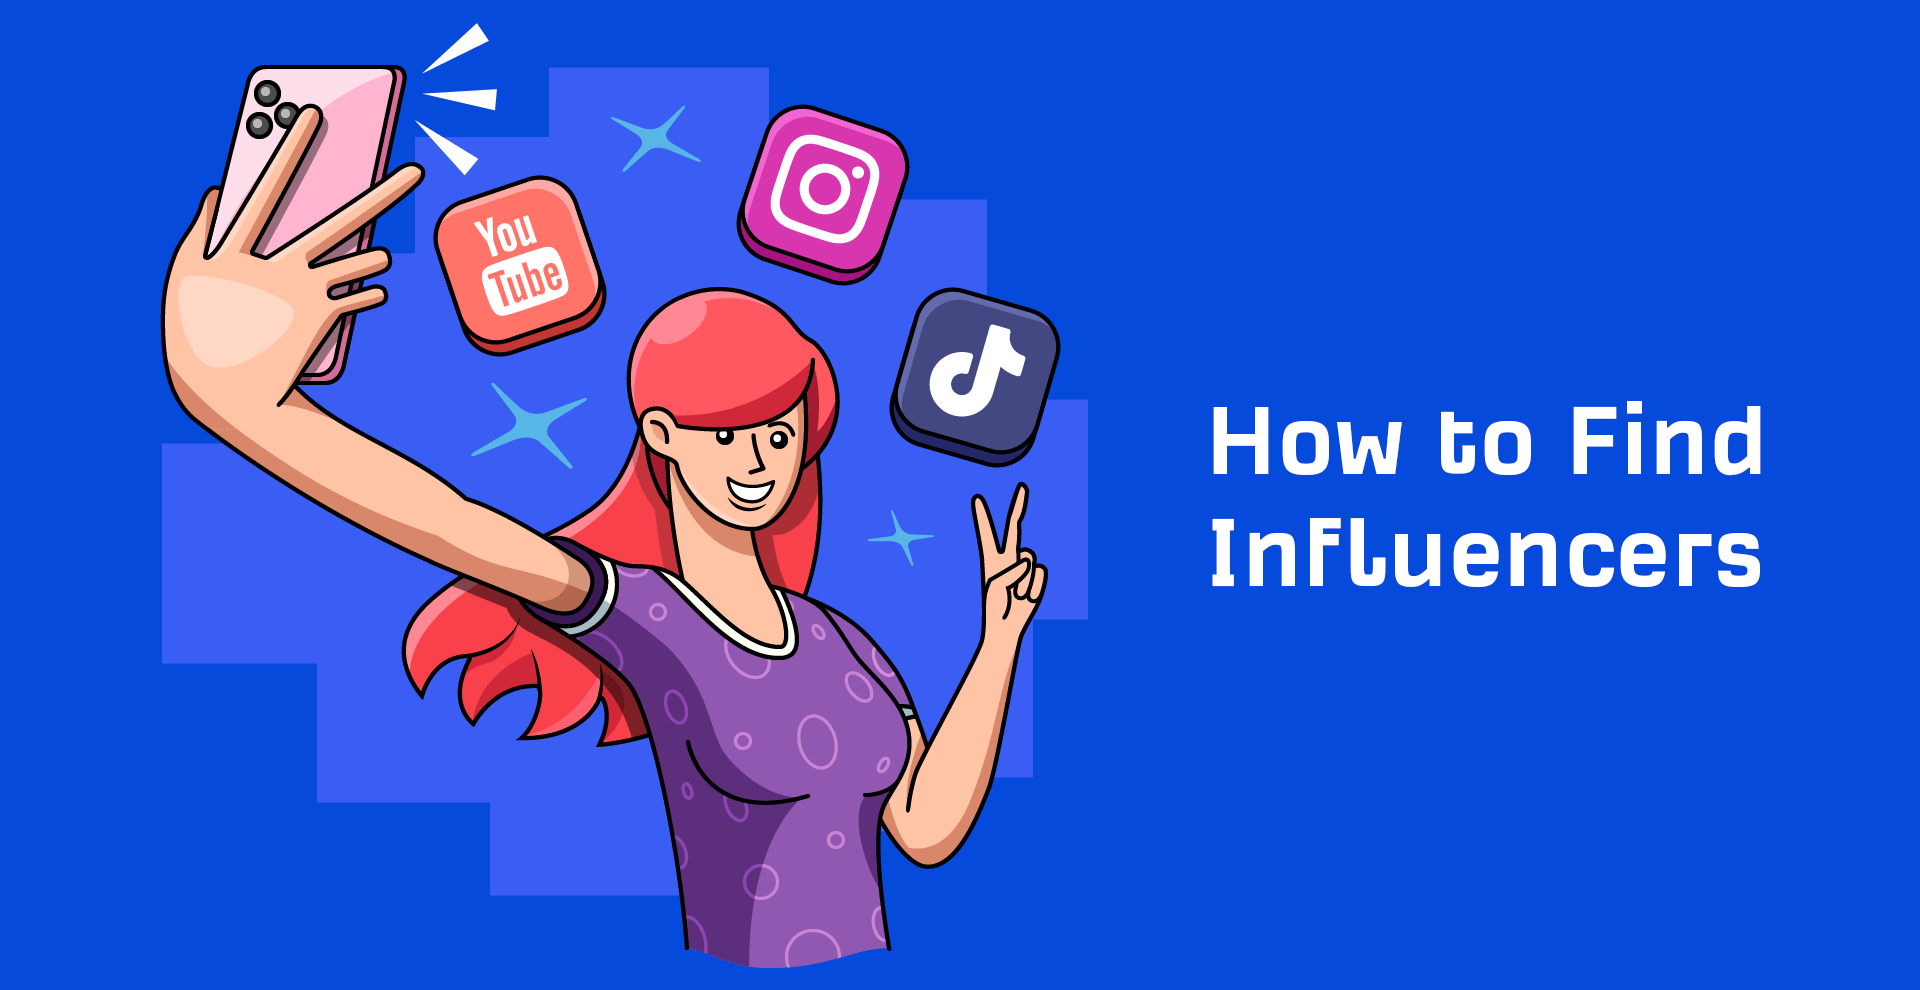 Find Influencers: 6 Easy Steps to Choose the Right Ones